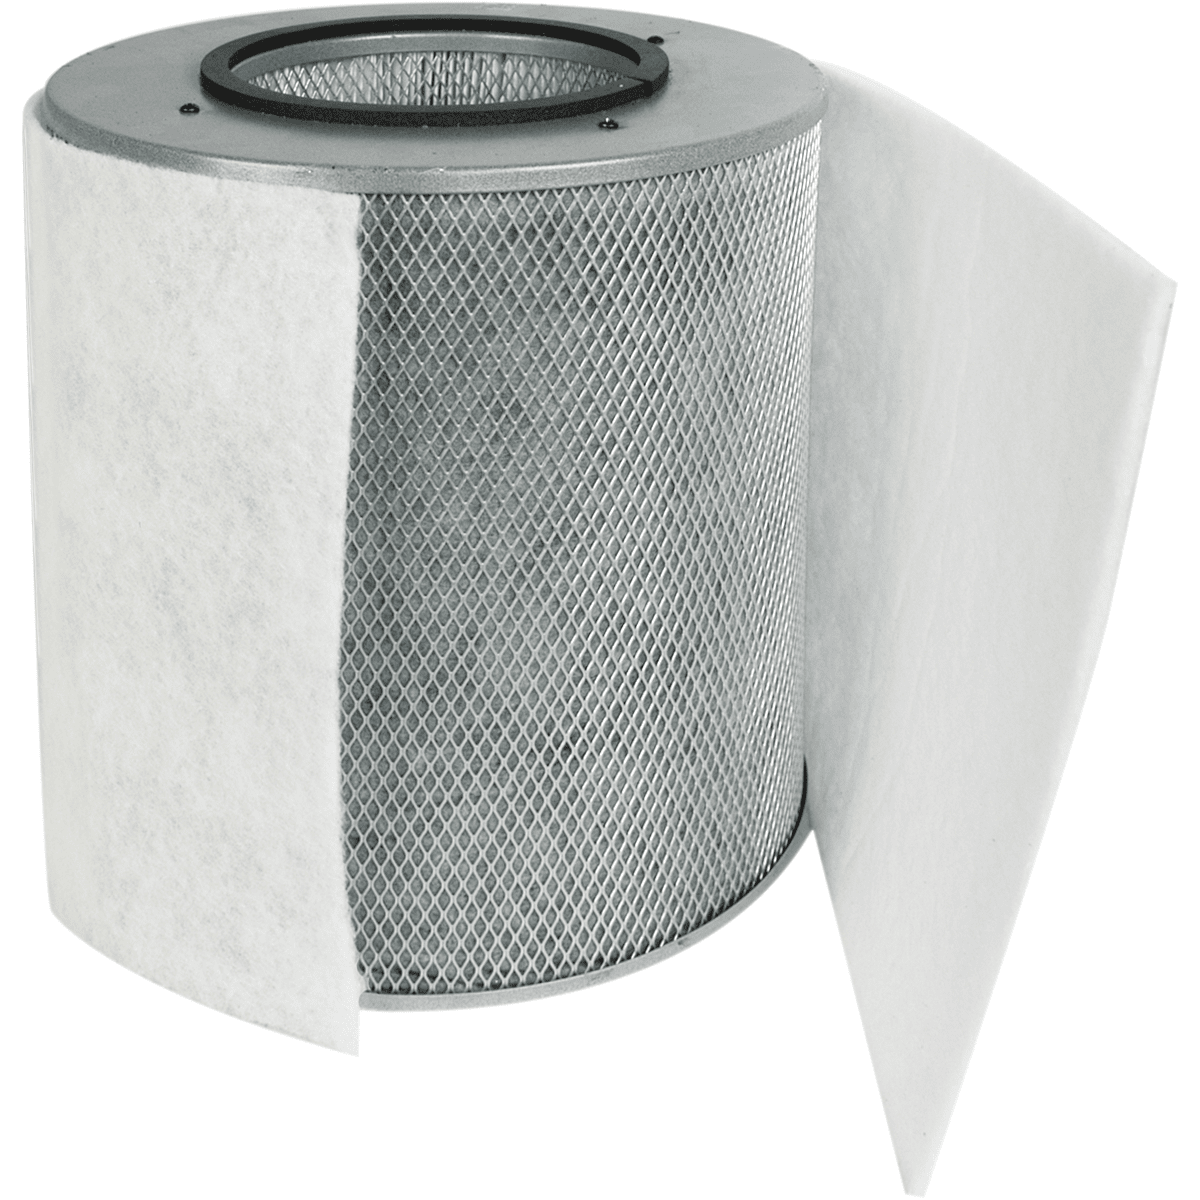 Austin Air Bedroom Machine Replacement Filter With Prefilter (Light Color)